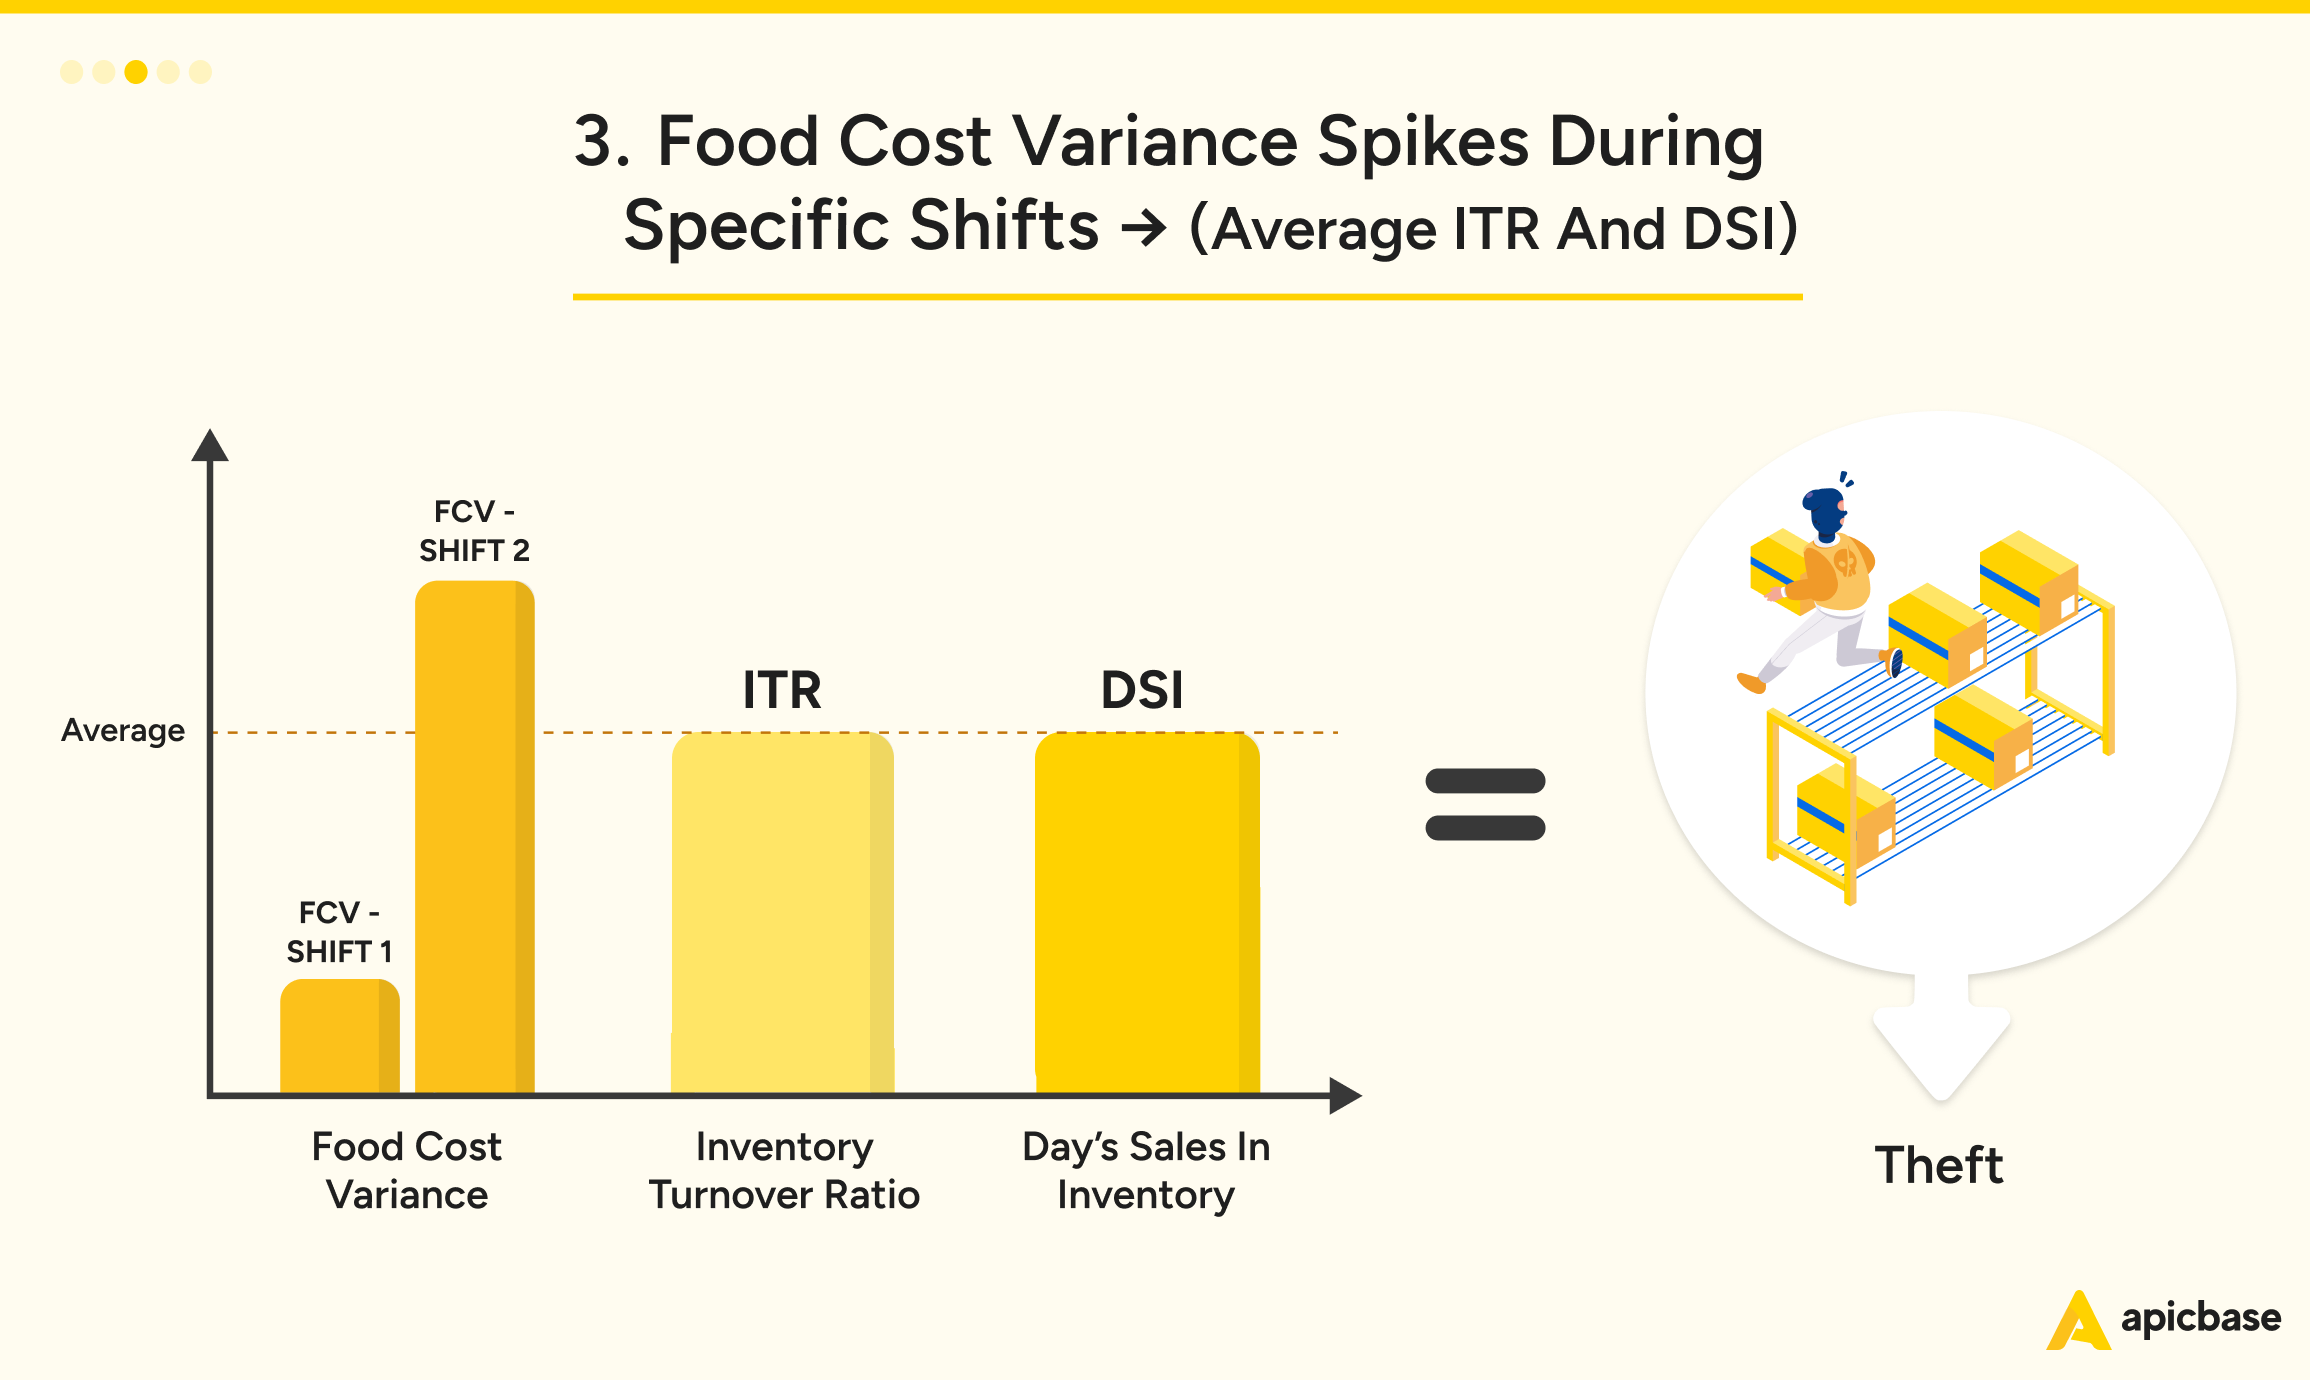 Restaurant Inventory Food cost variance spikes during specific shifts 